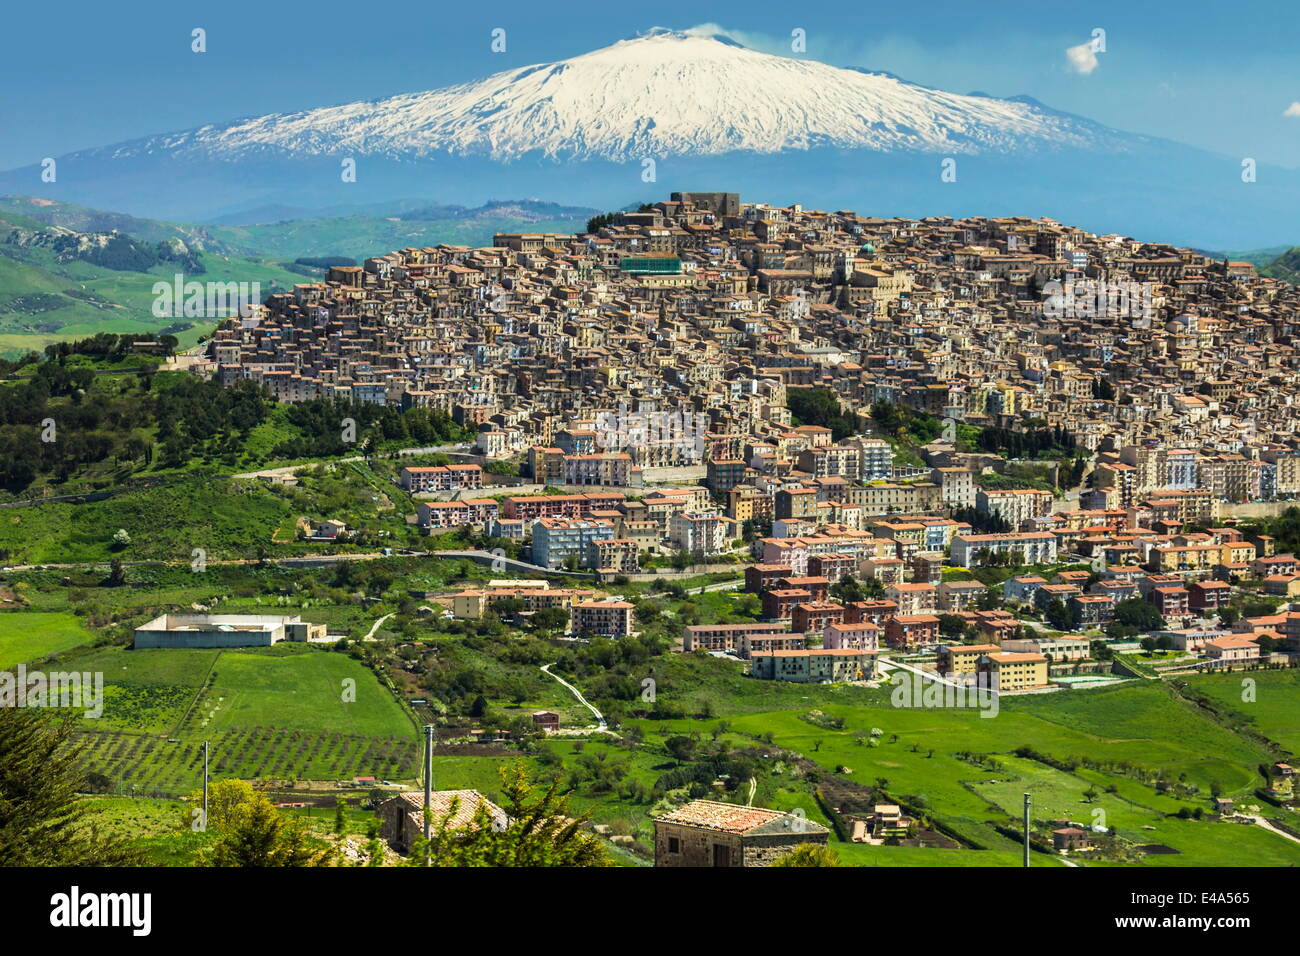 Hill town with backdrop of snowy volcano Mount Etna, Gangi, Palermo Province, Sicily, Italy, Mediterranean, Europe Stock Photo